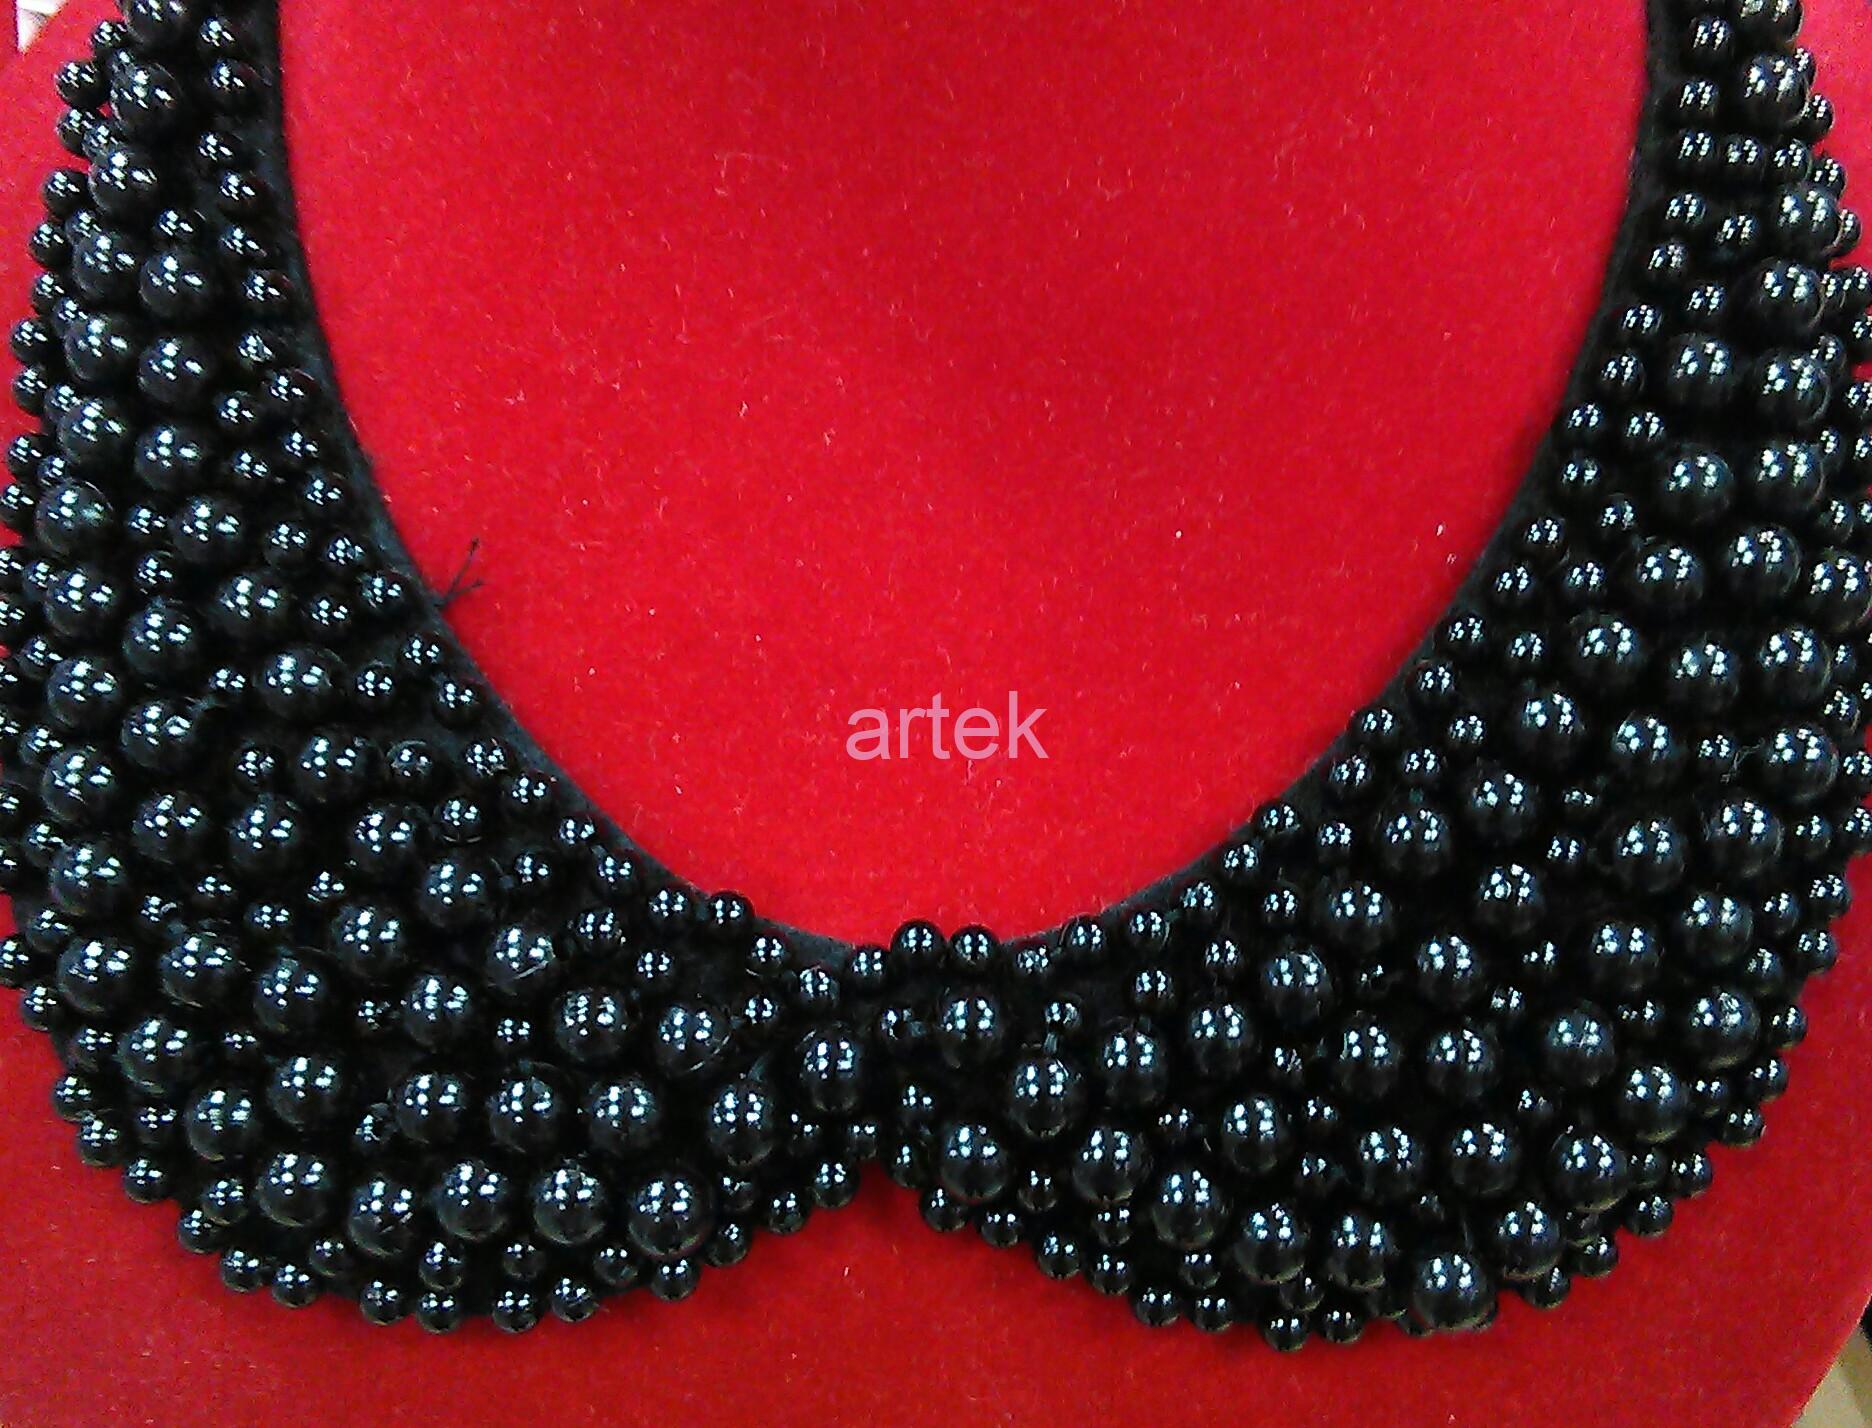 MARIA neck trim beads and lobster for closure at back,made by Artek factory